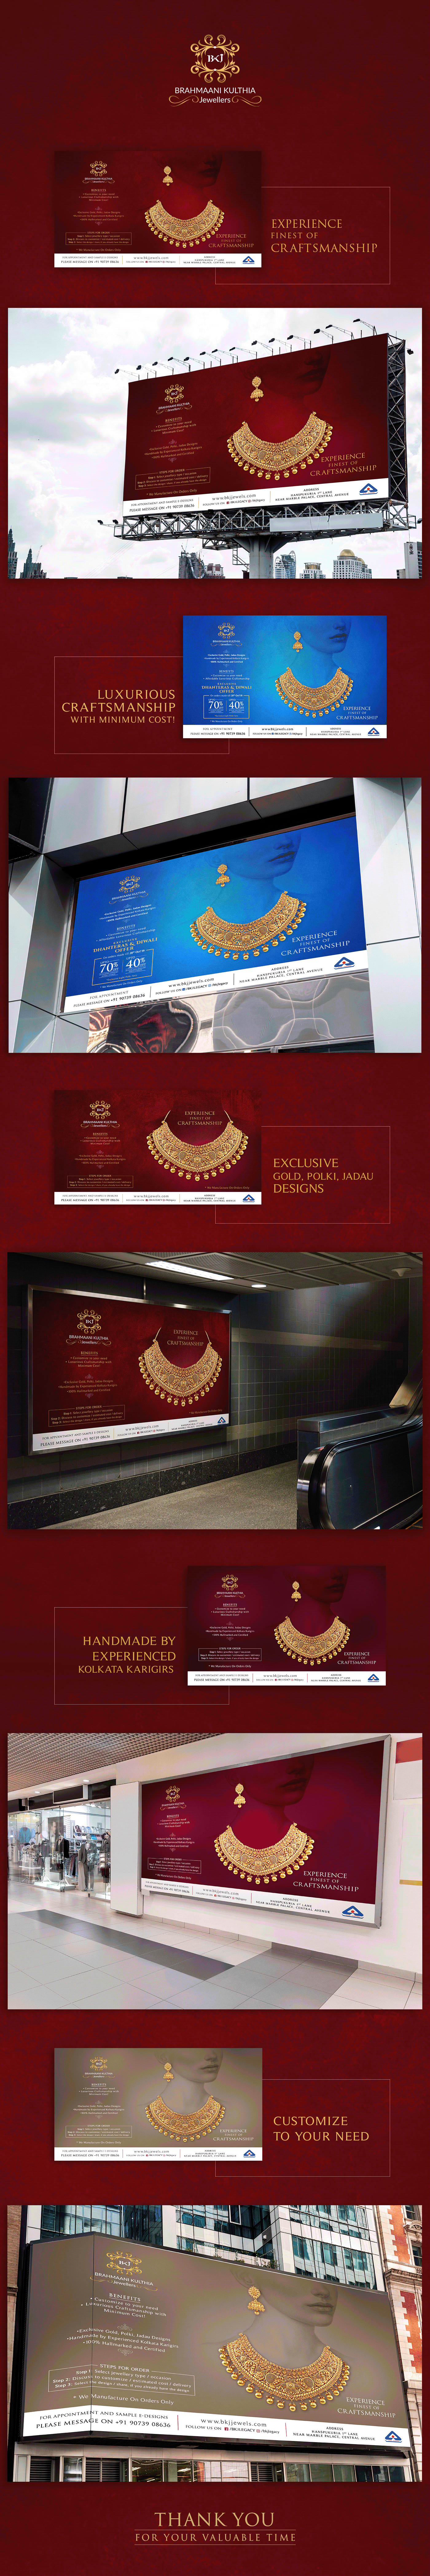 advertisement banner campaign design festive gold Hoarding Jewellery Photography  social media